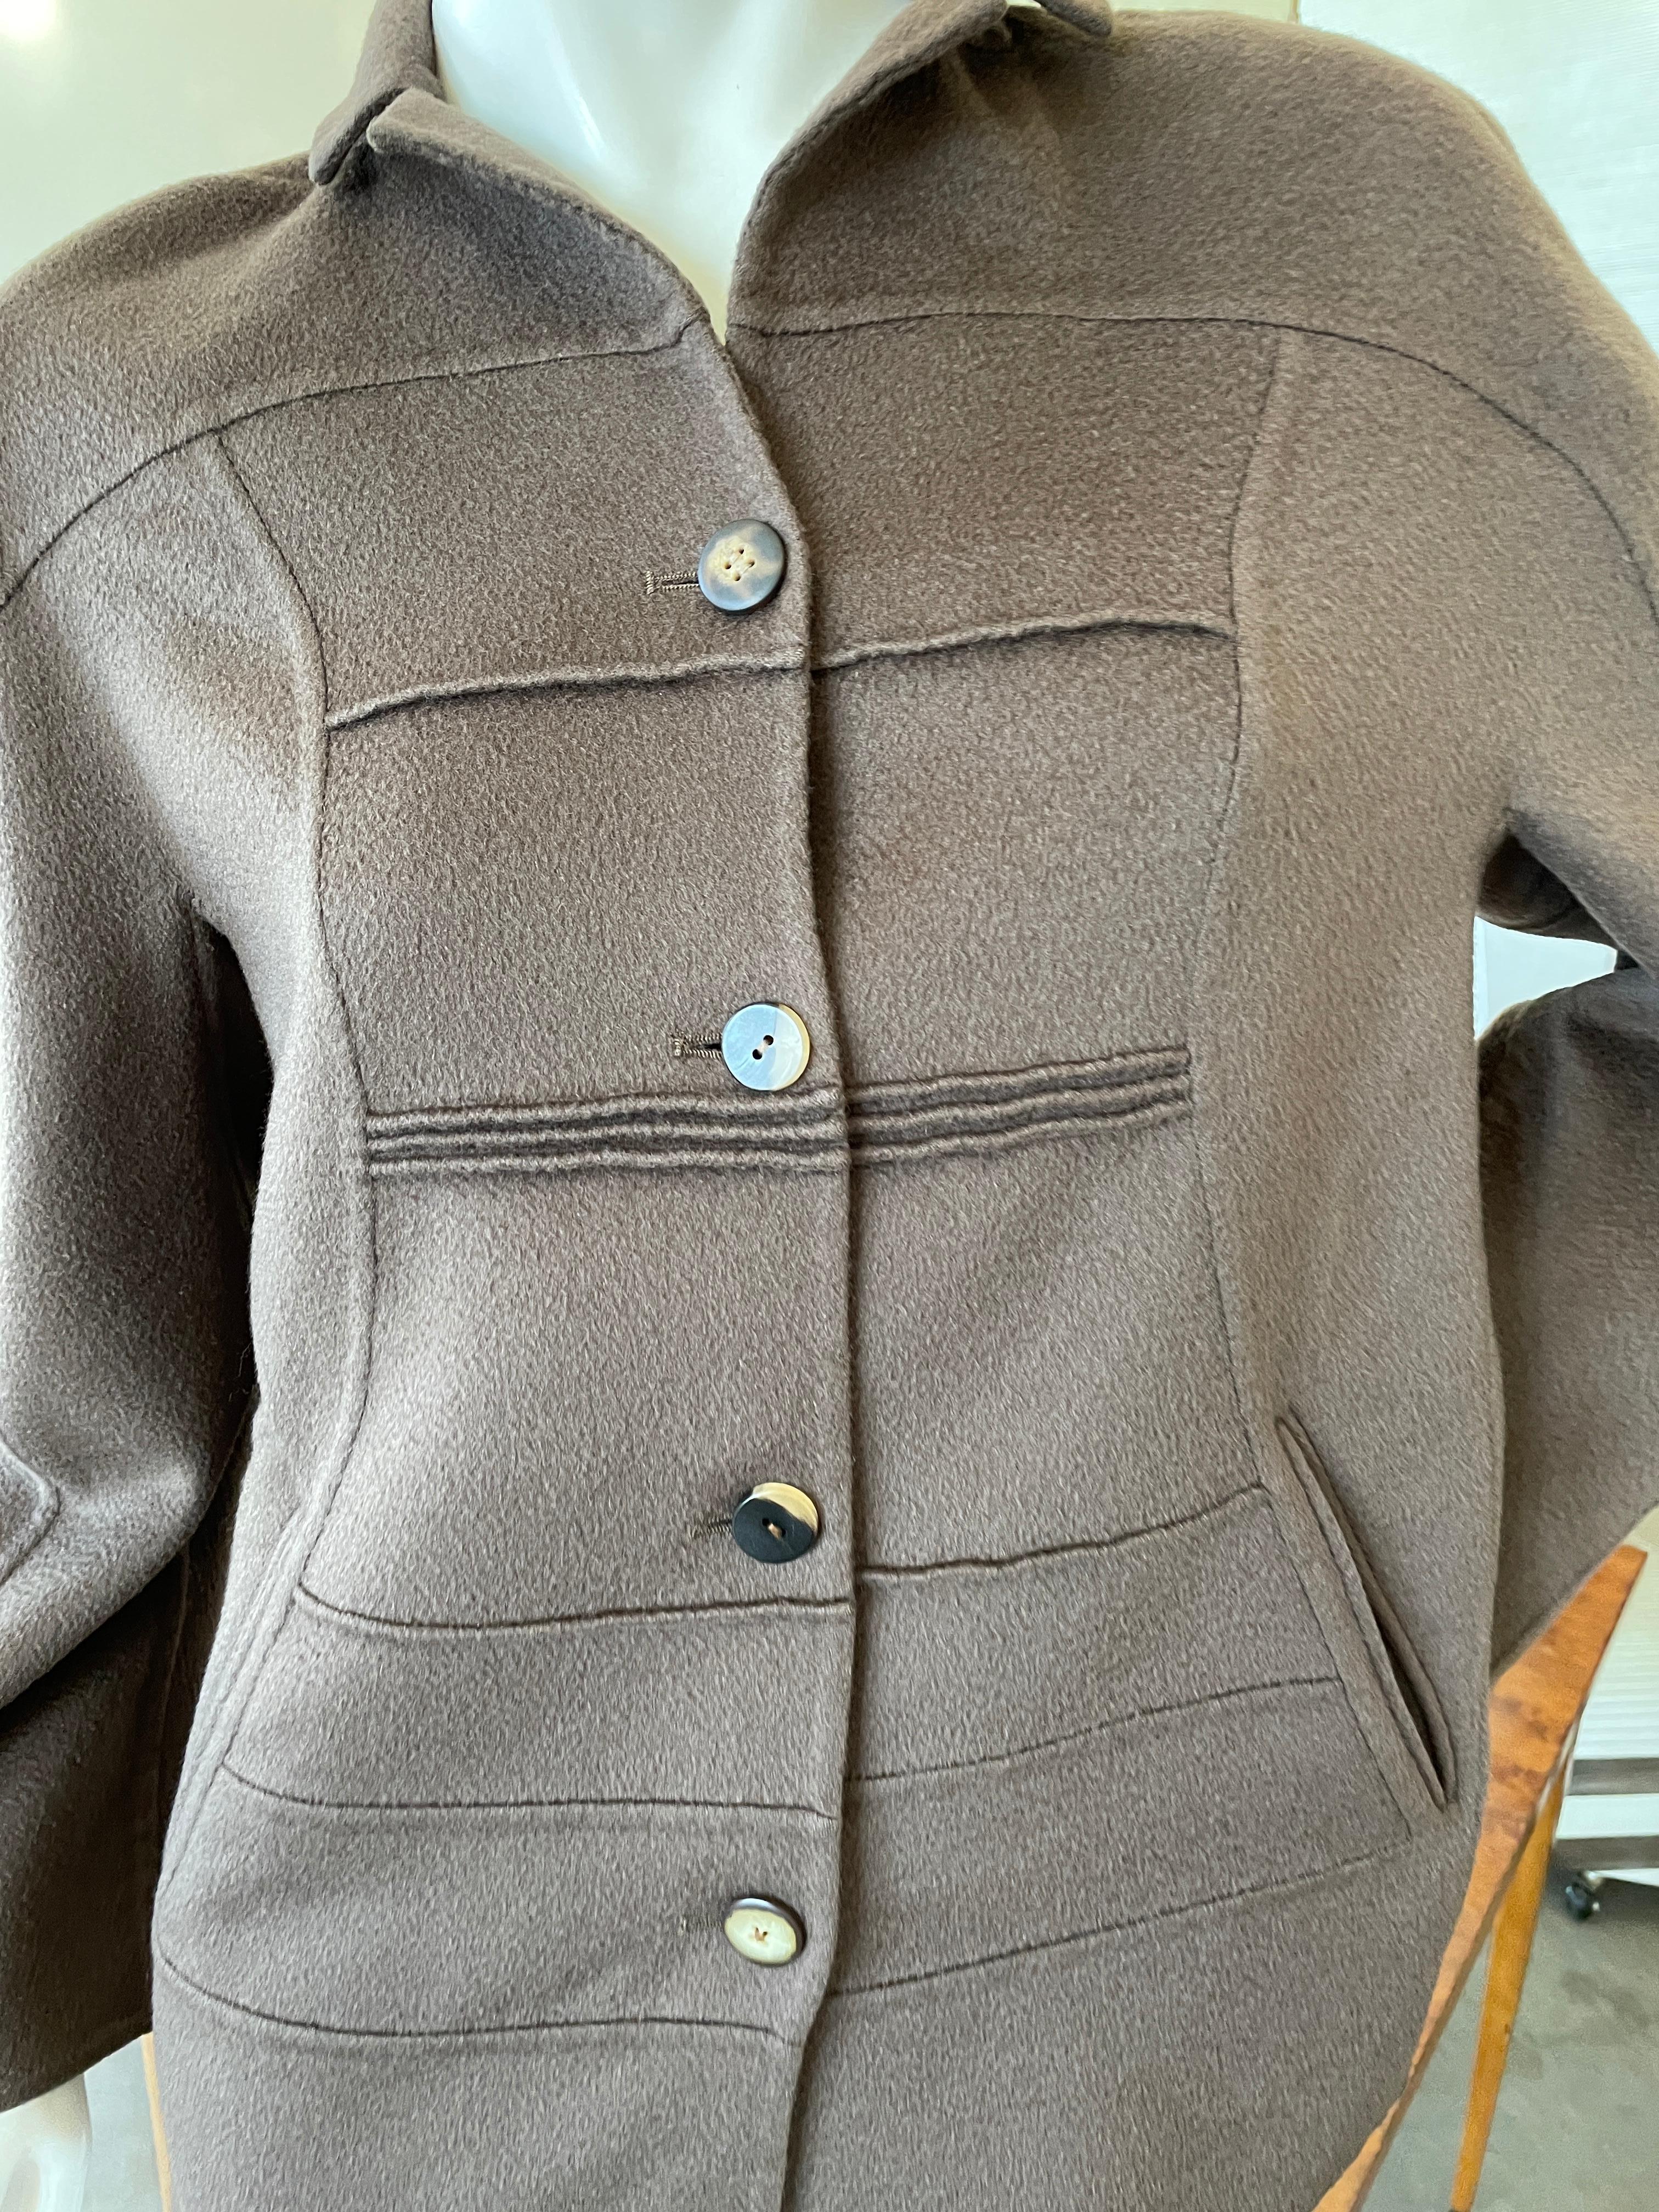 Chado Ralph Rucci Luxurious Pure Doubleface Cashmere Jacket In Excellent Condition For Sale In Cloverdale, CA